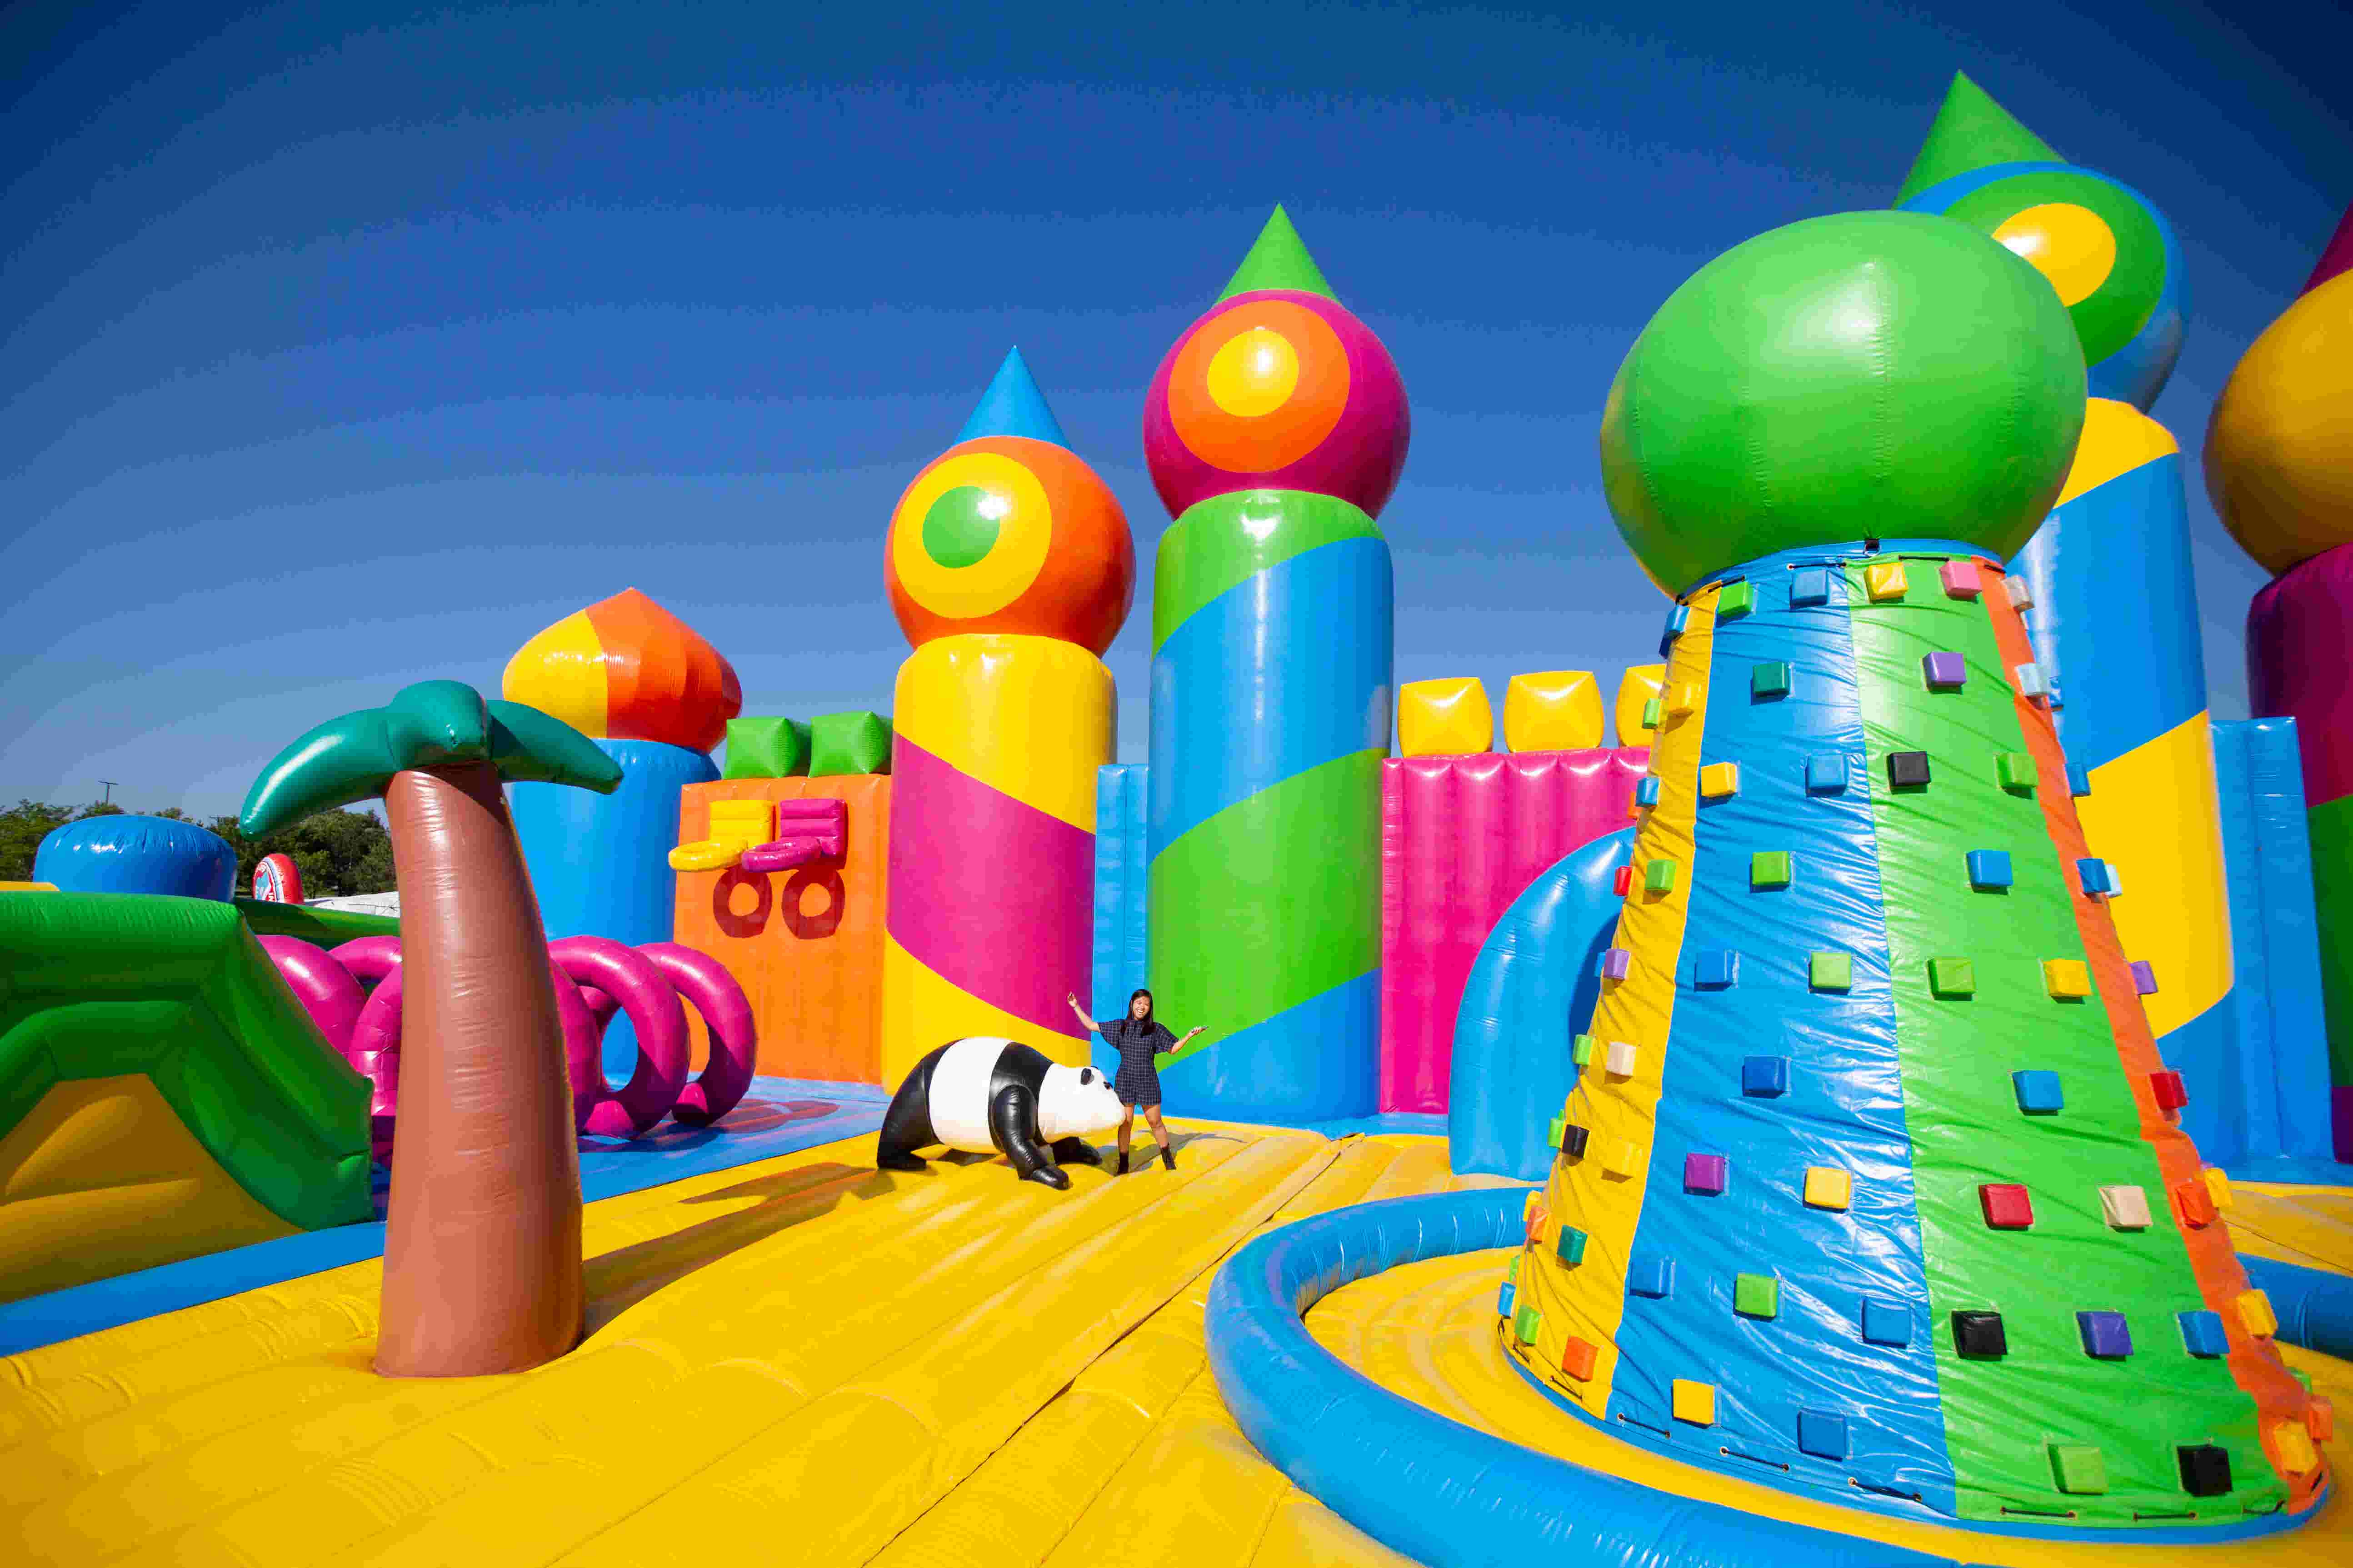 Watch Inside The Worlds Largest Bounce House